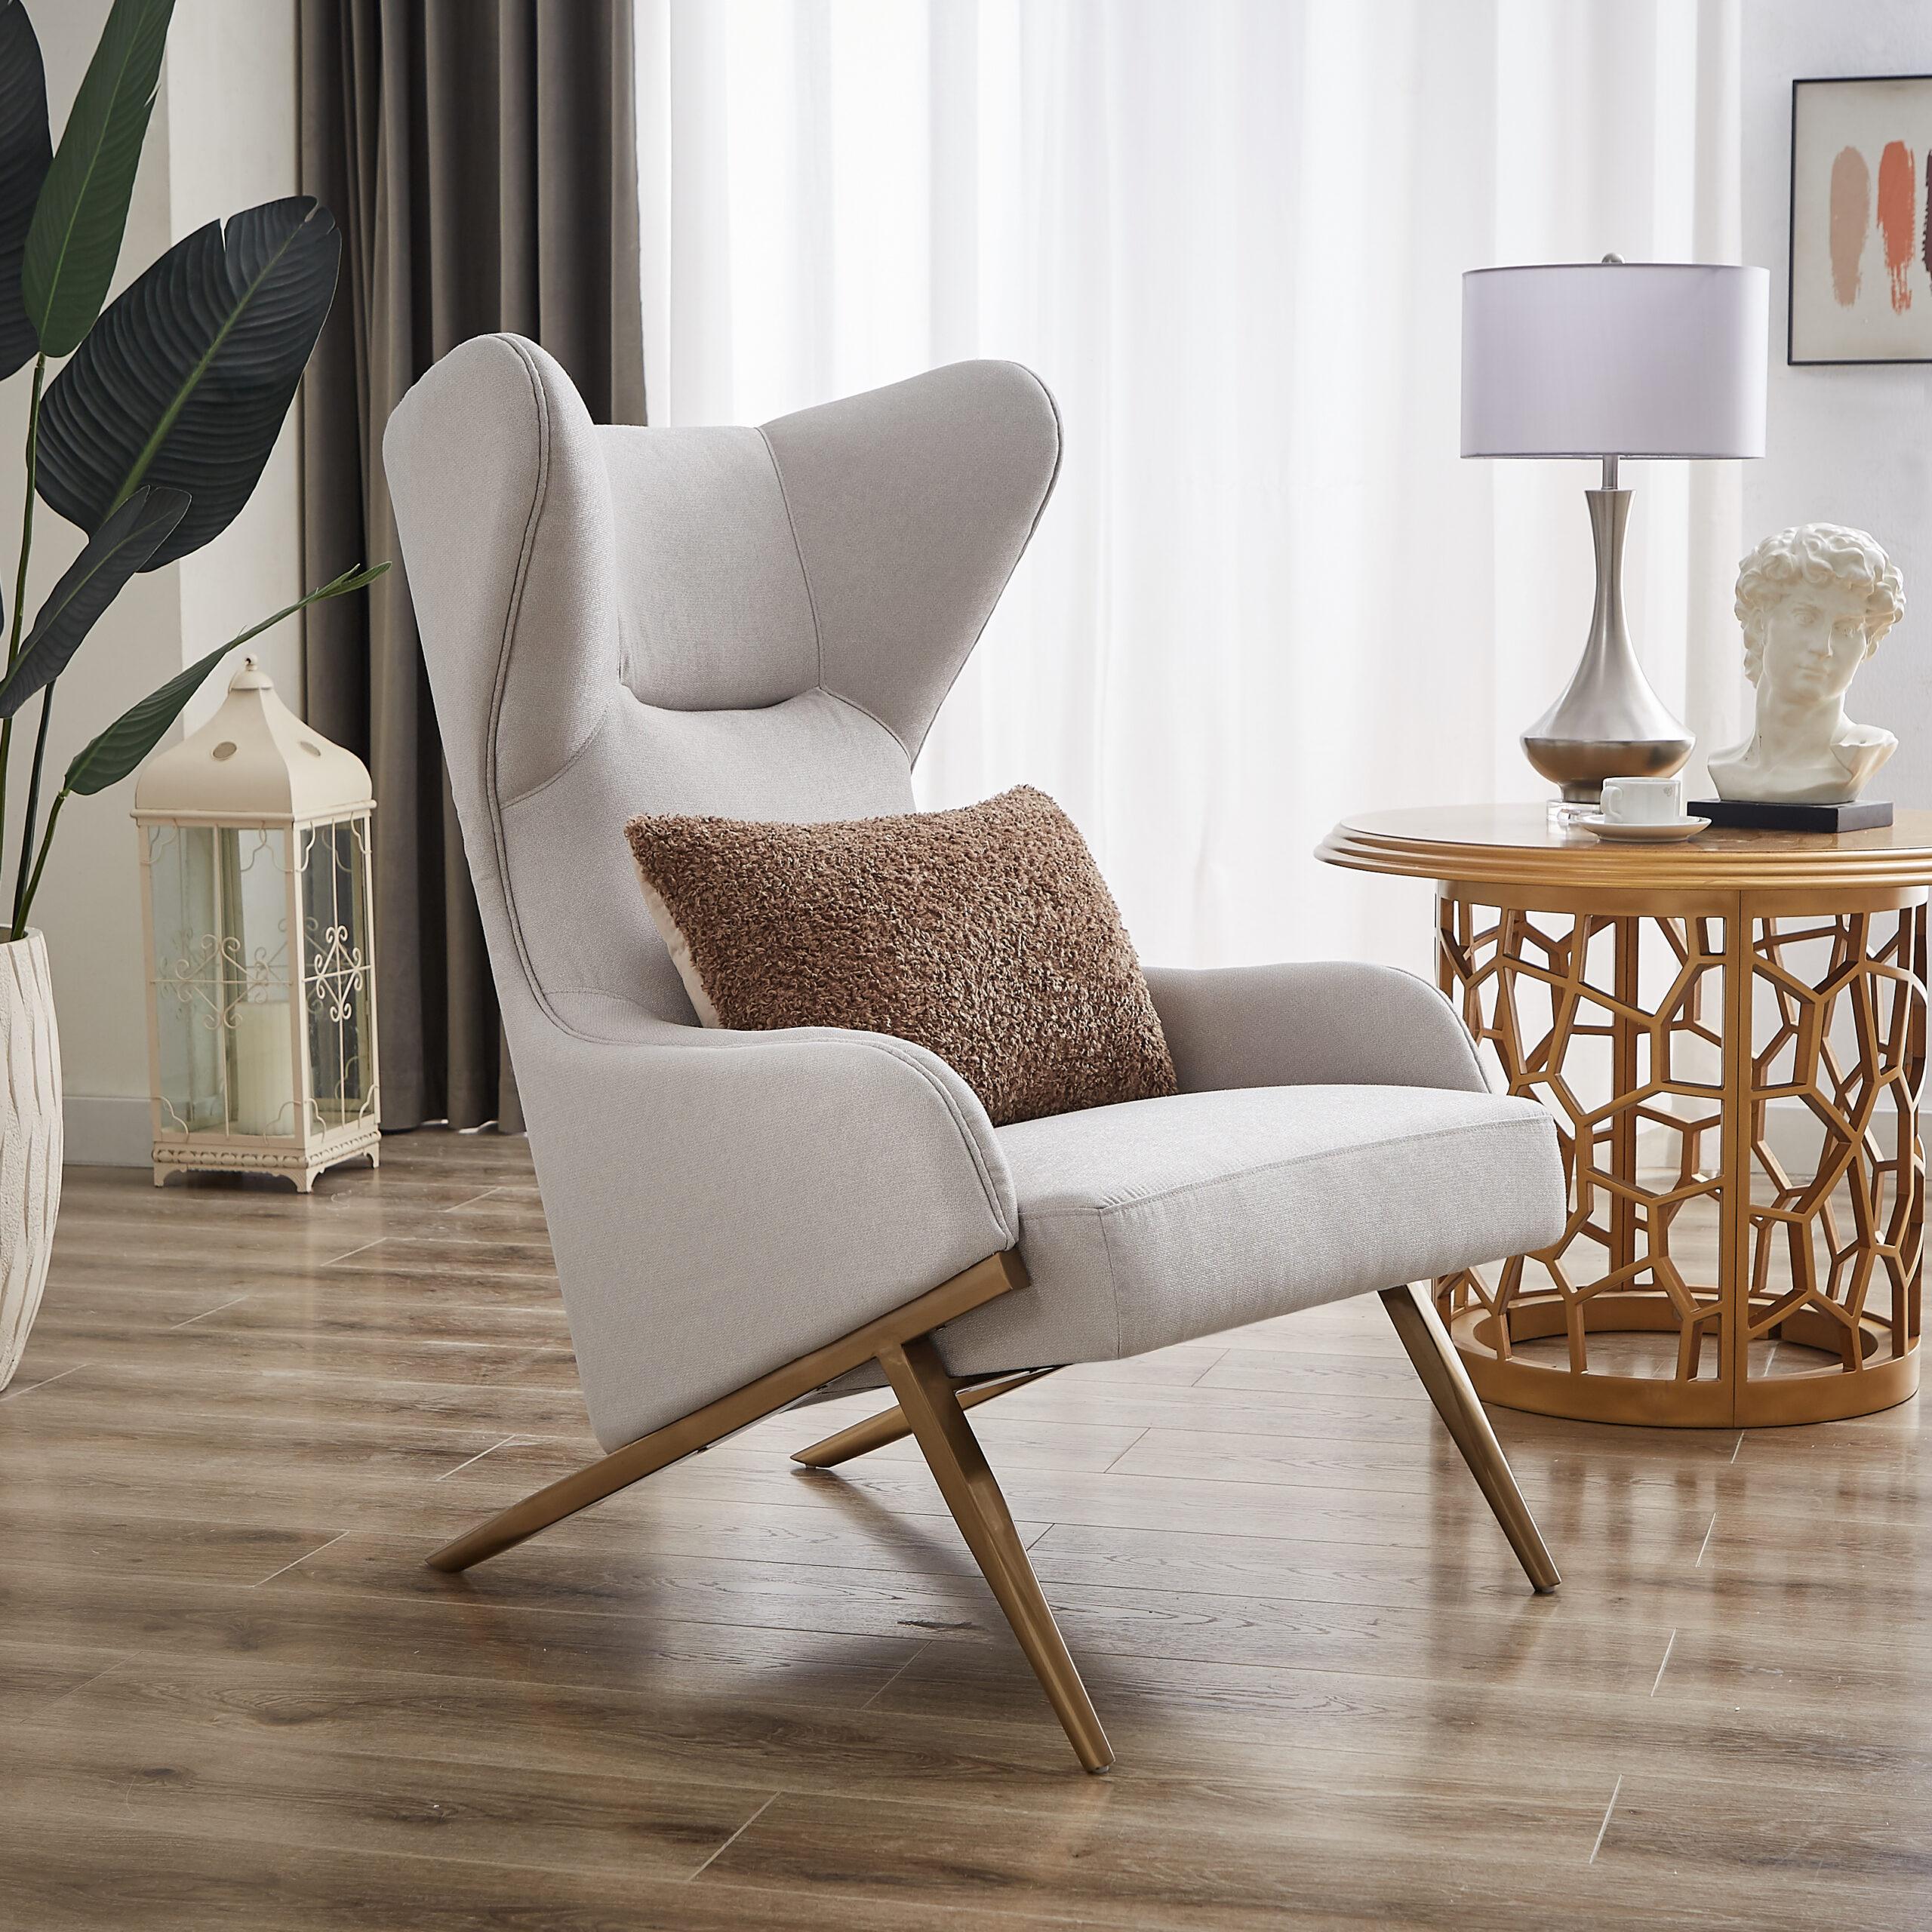 Classic, Traditional Chair HD-9027 Chair HD-C9027 HD-C9027 in Light Gray, Gold Fabric